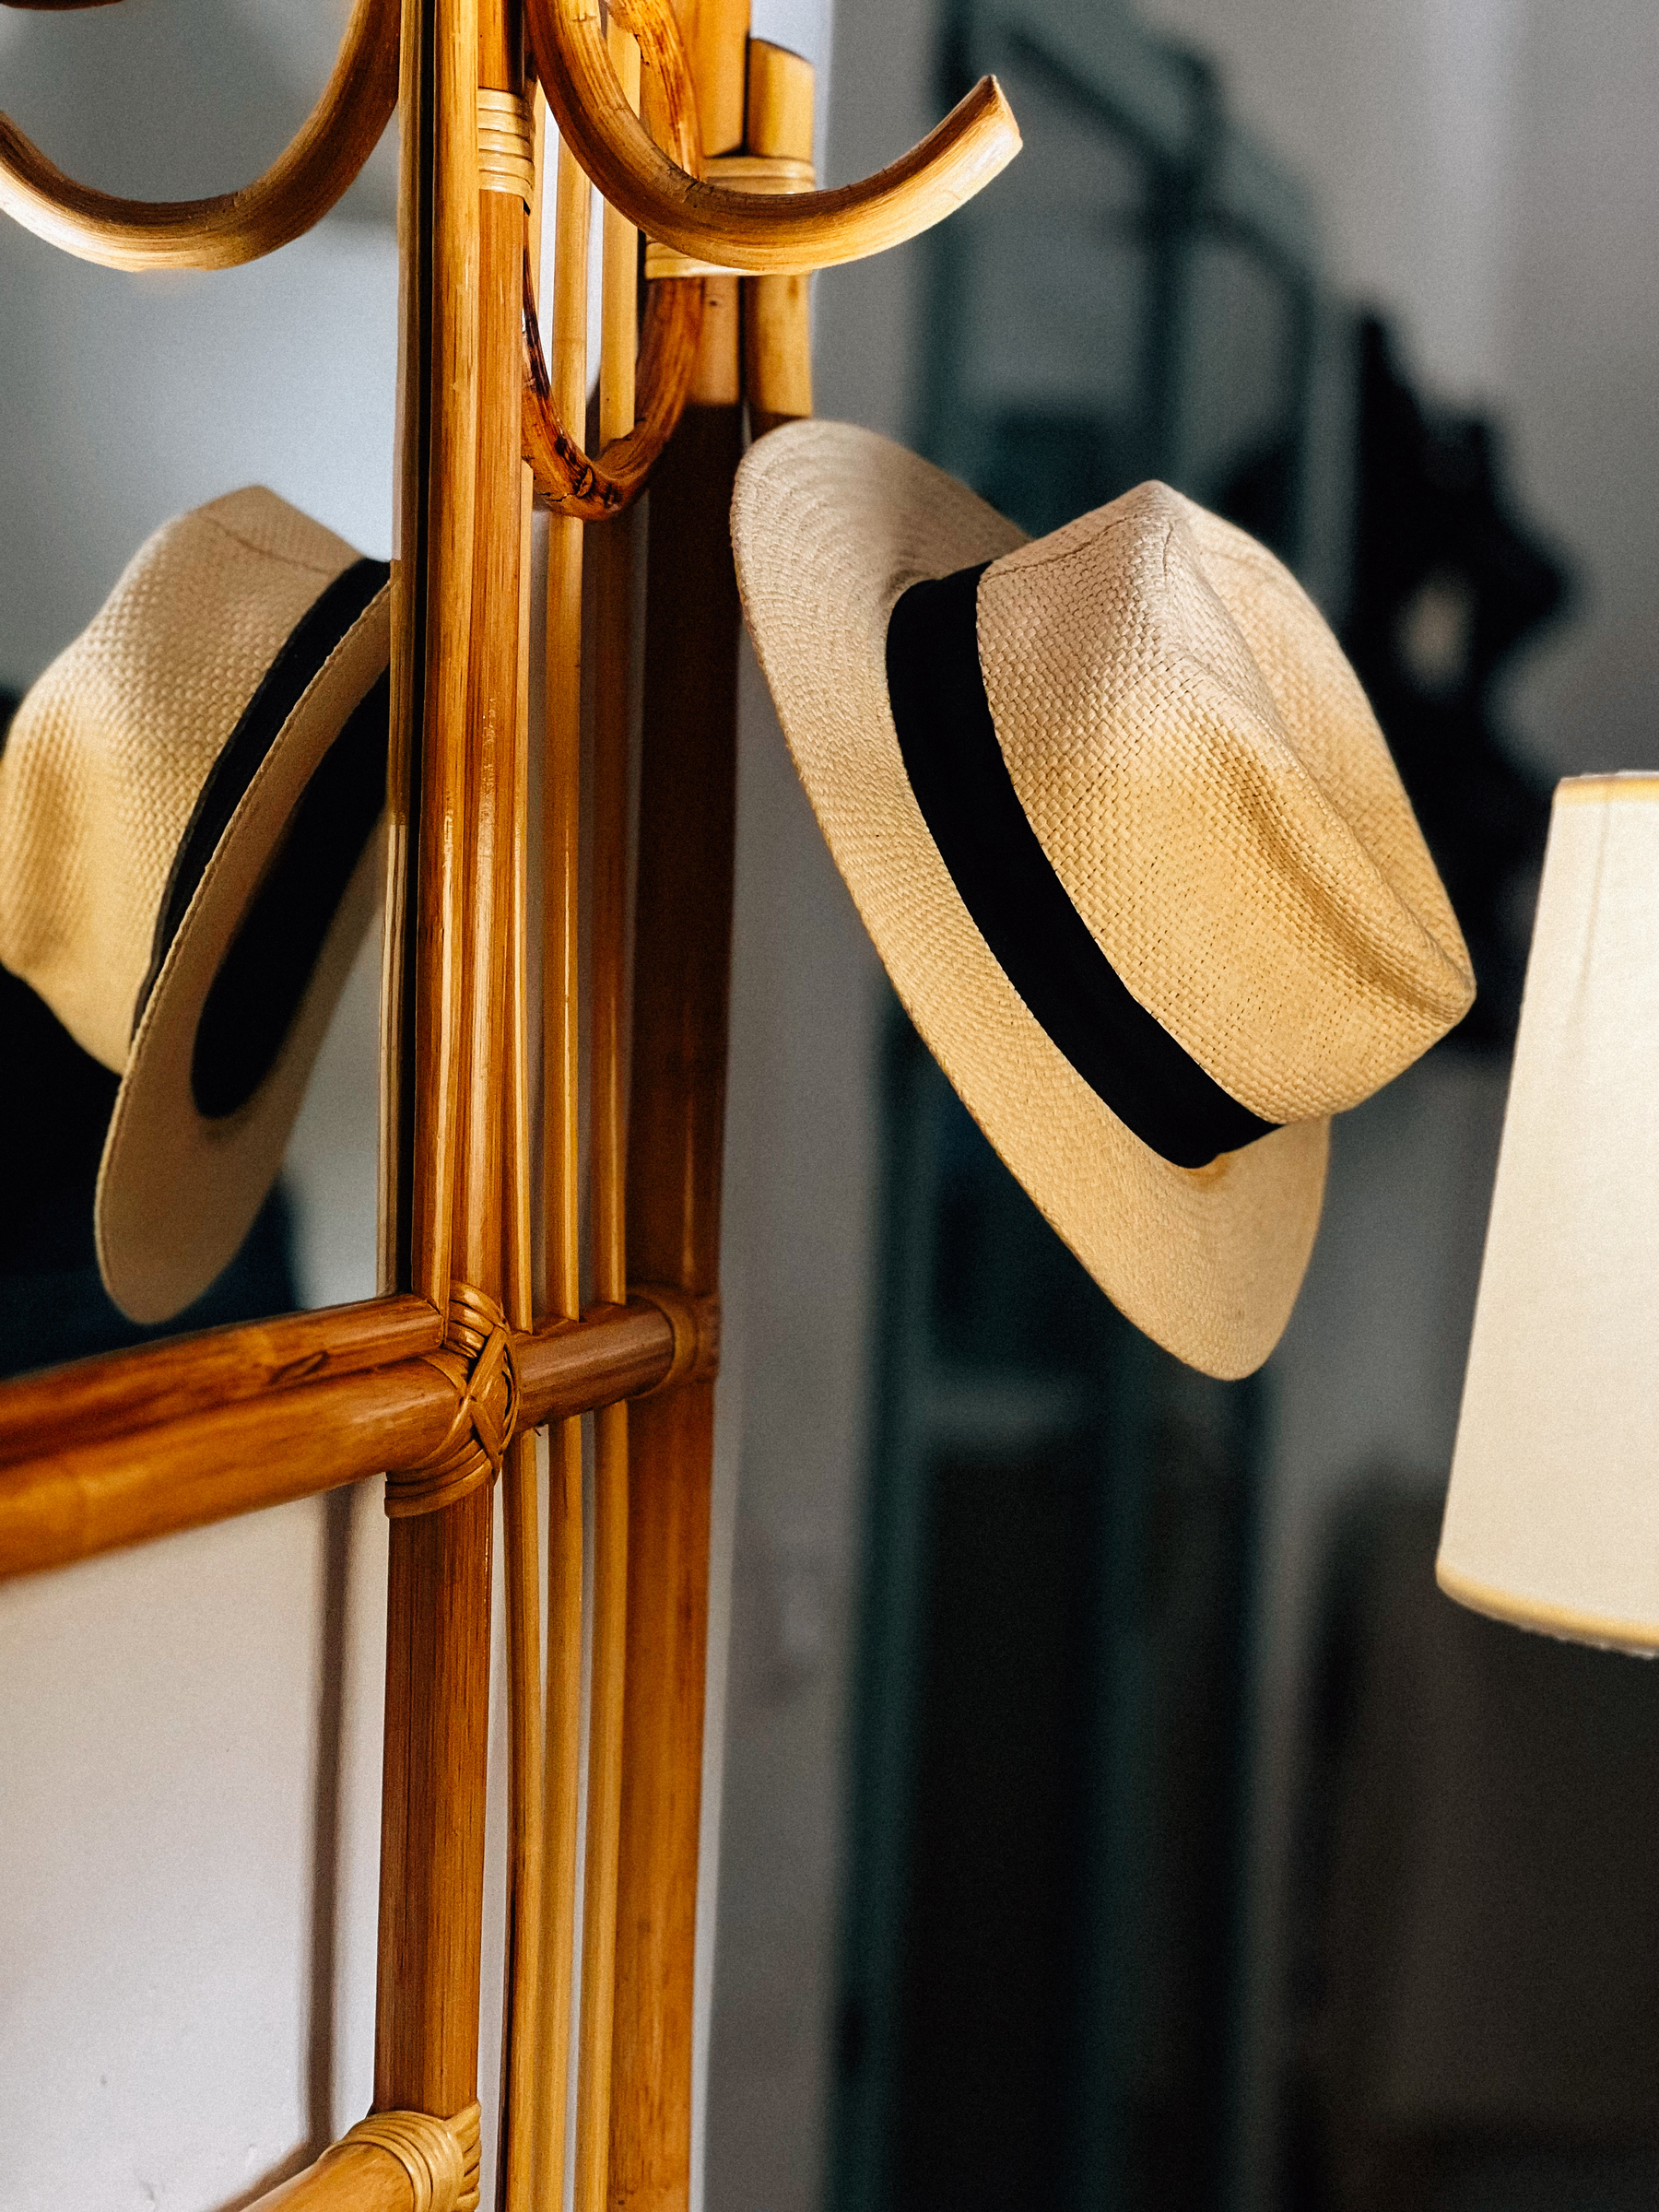 A wooden coat rack with a straw hat hanging on its hooks, with a warm light illuminating the scene.